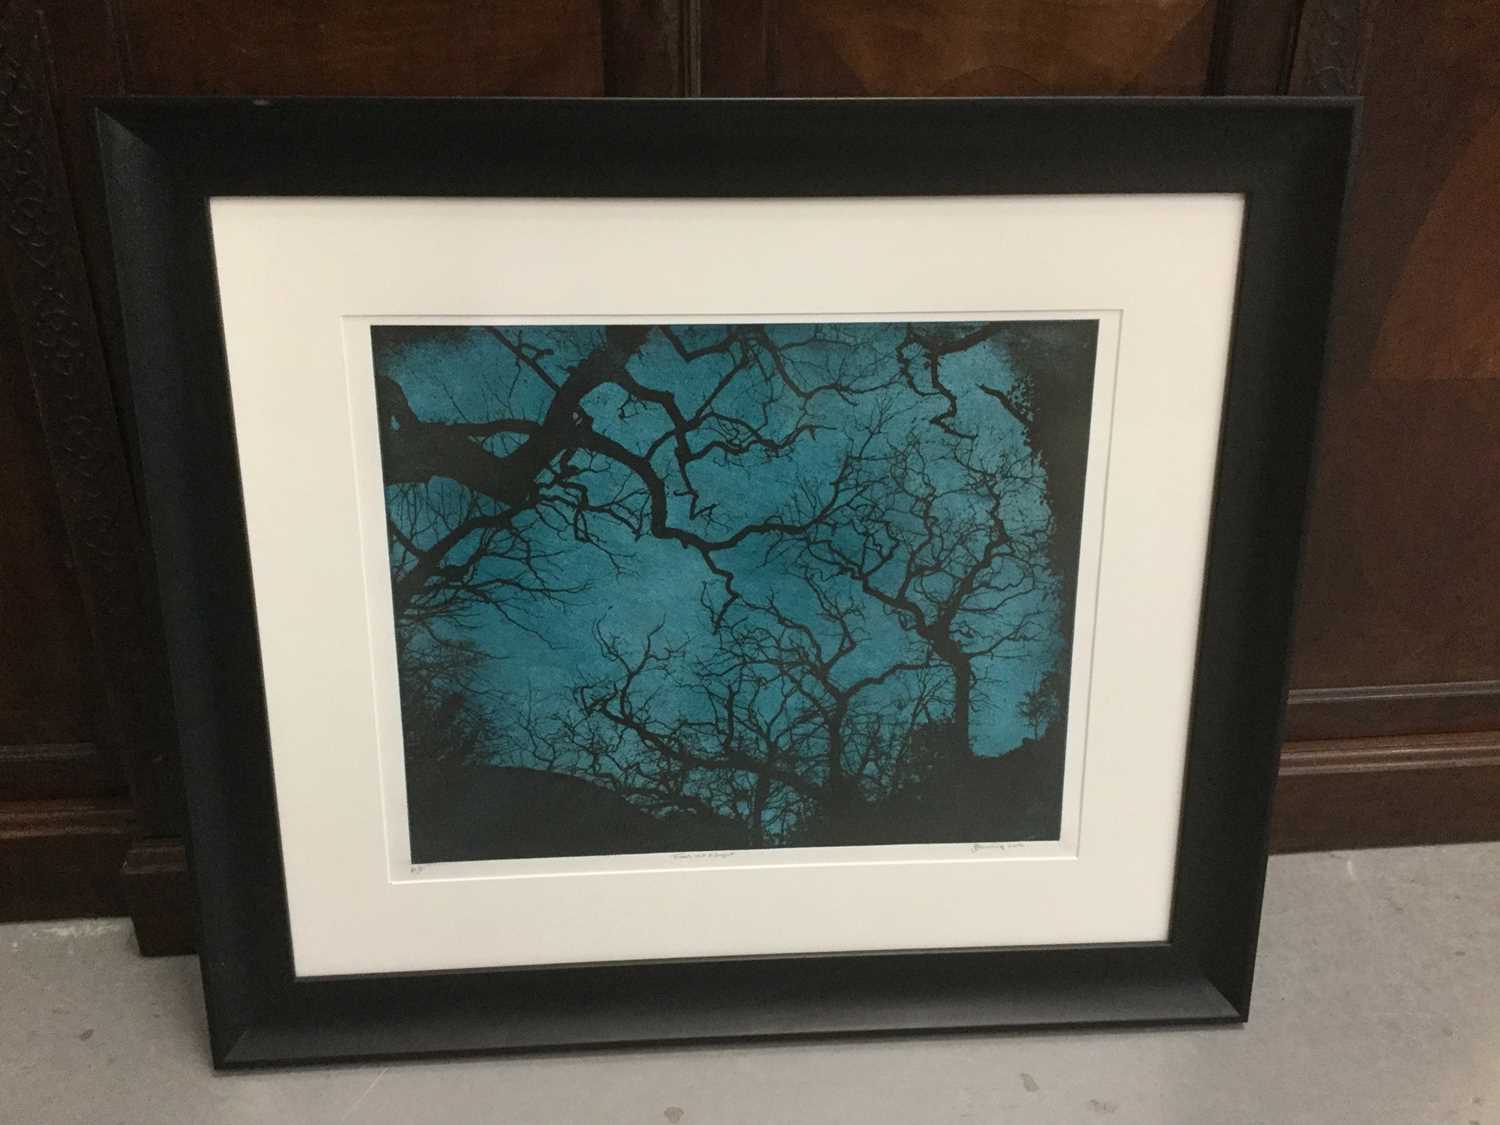 Lot 20 - Jenny Gunning Contemporary Artists Proof 'Trees at Night' signed and dated 2016, mounted in glazed frame, purchased from Ironbridge Fine Art for £320.00